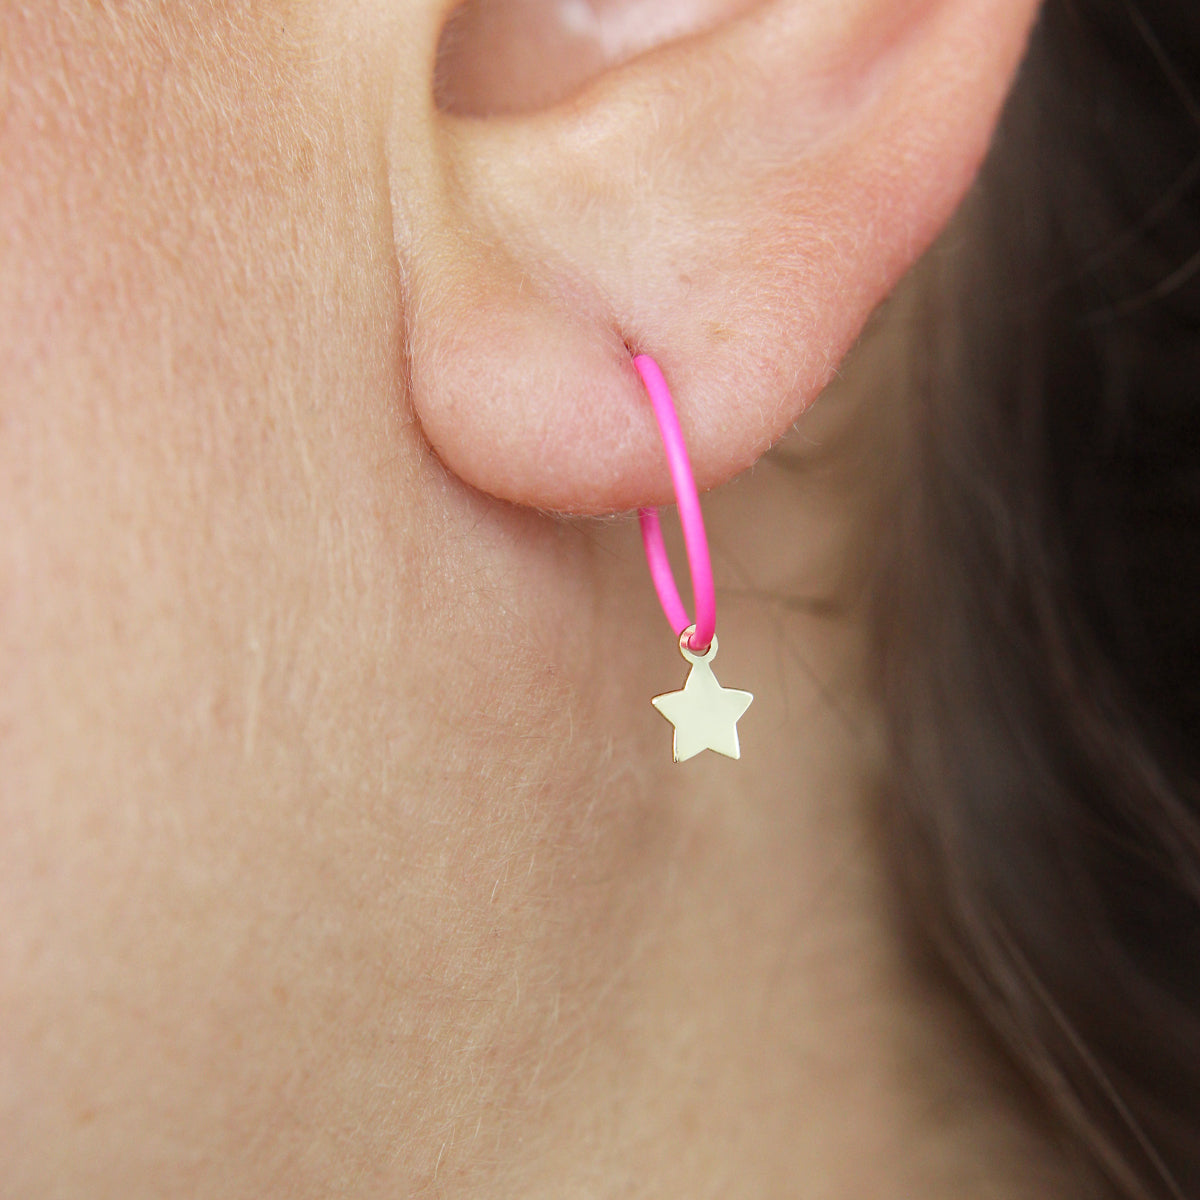 Earrings - Single earring with Star and painted hoop - ORO18KT - 5 | Rue des Mille